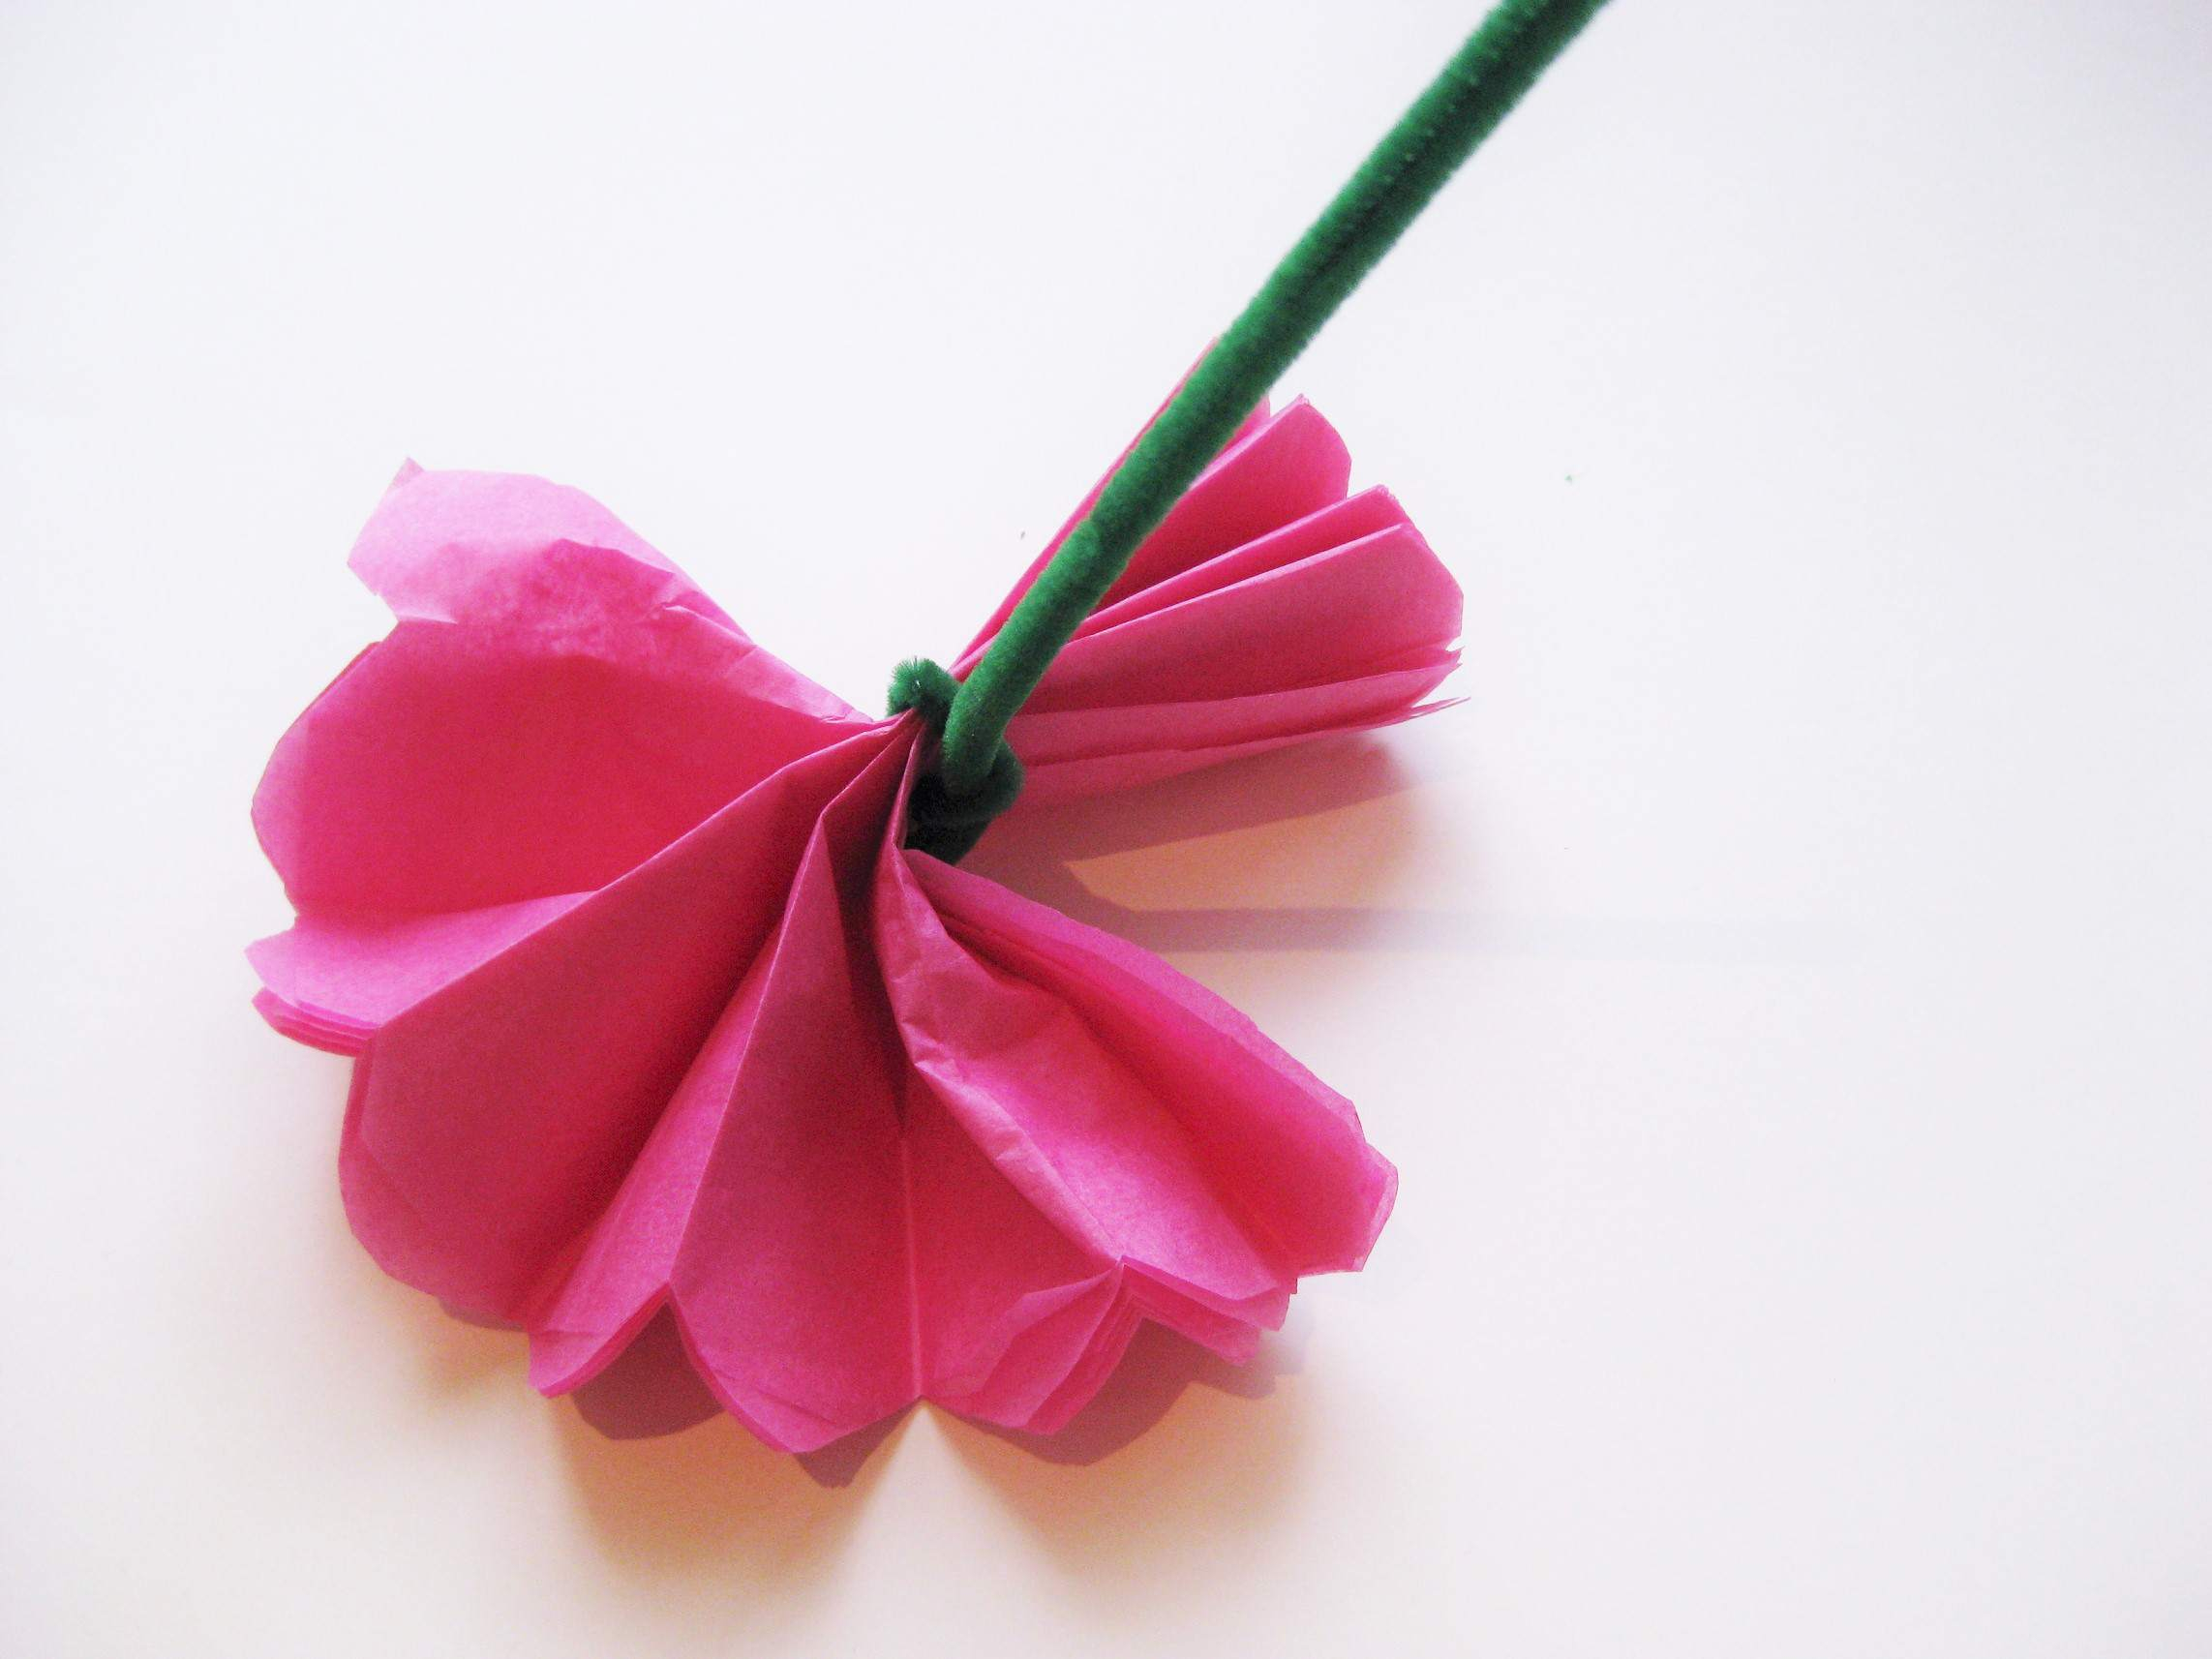 Paper Flower Origami 3D Model Simple Steps To Craft Tissue Paper Flowers